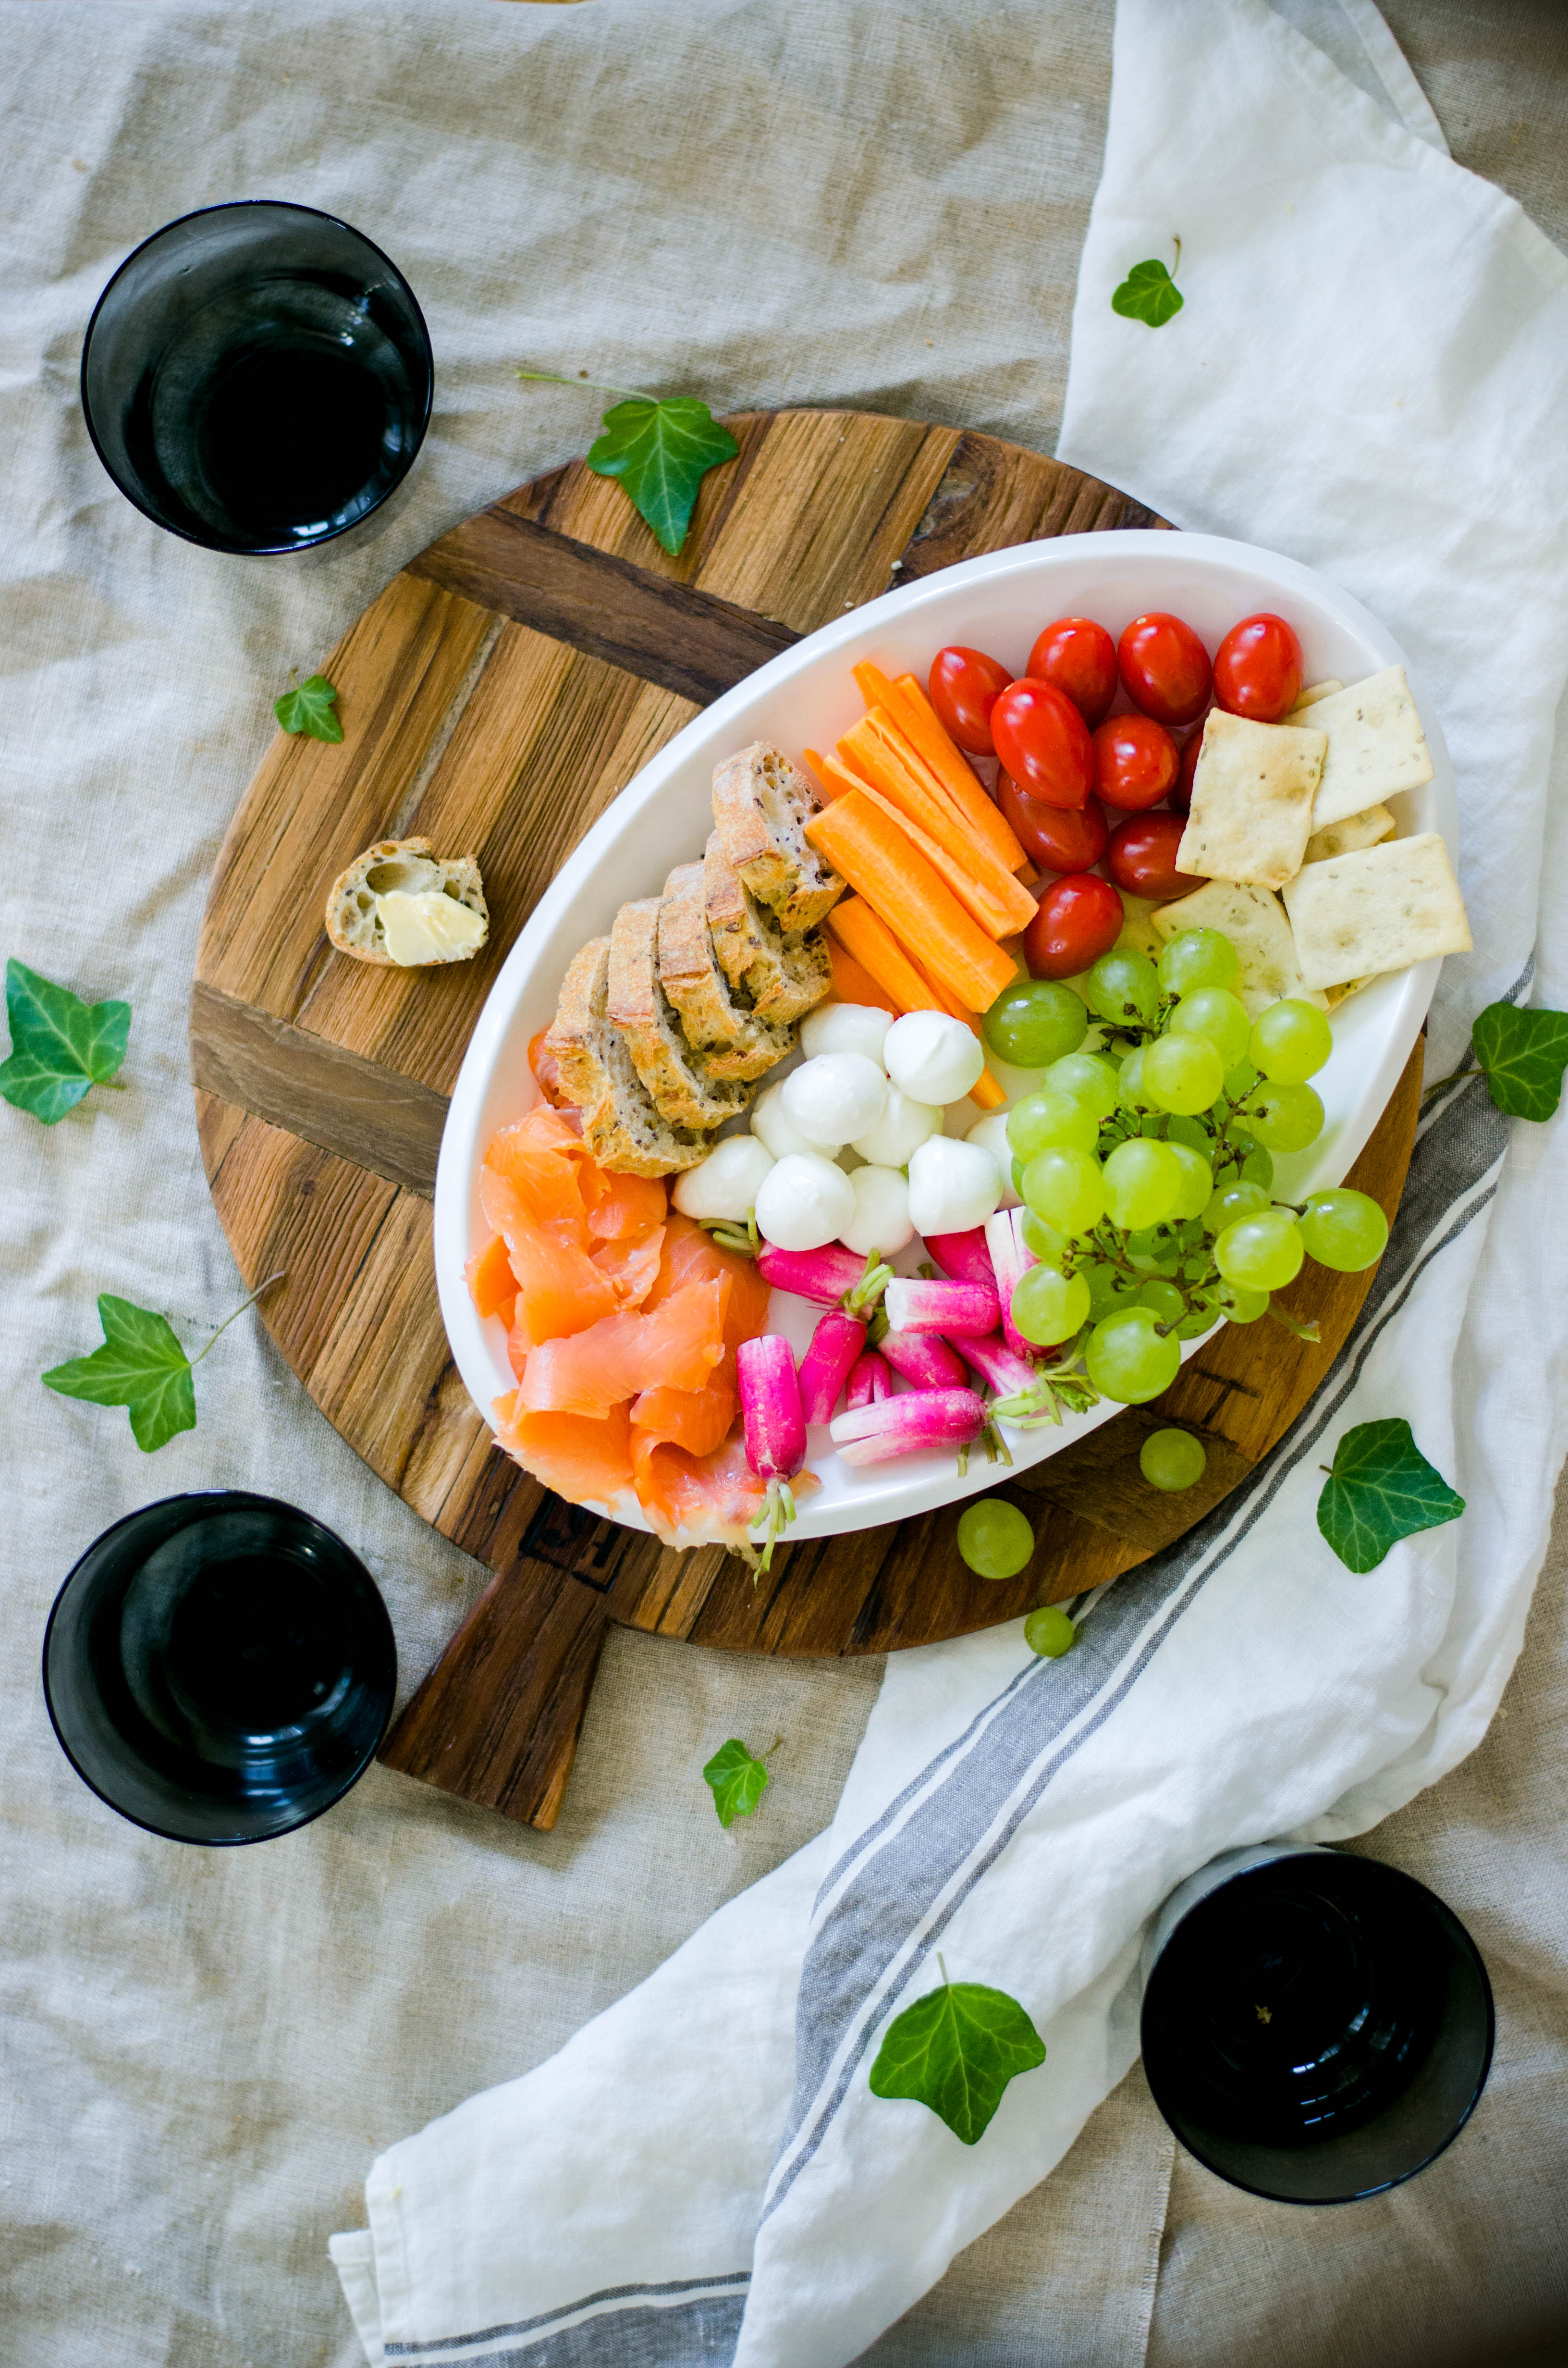 How to Make an Epic Healthy Grazing Platter